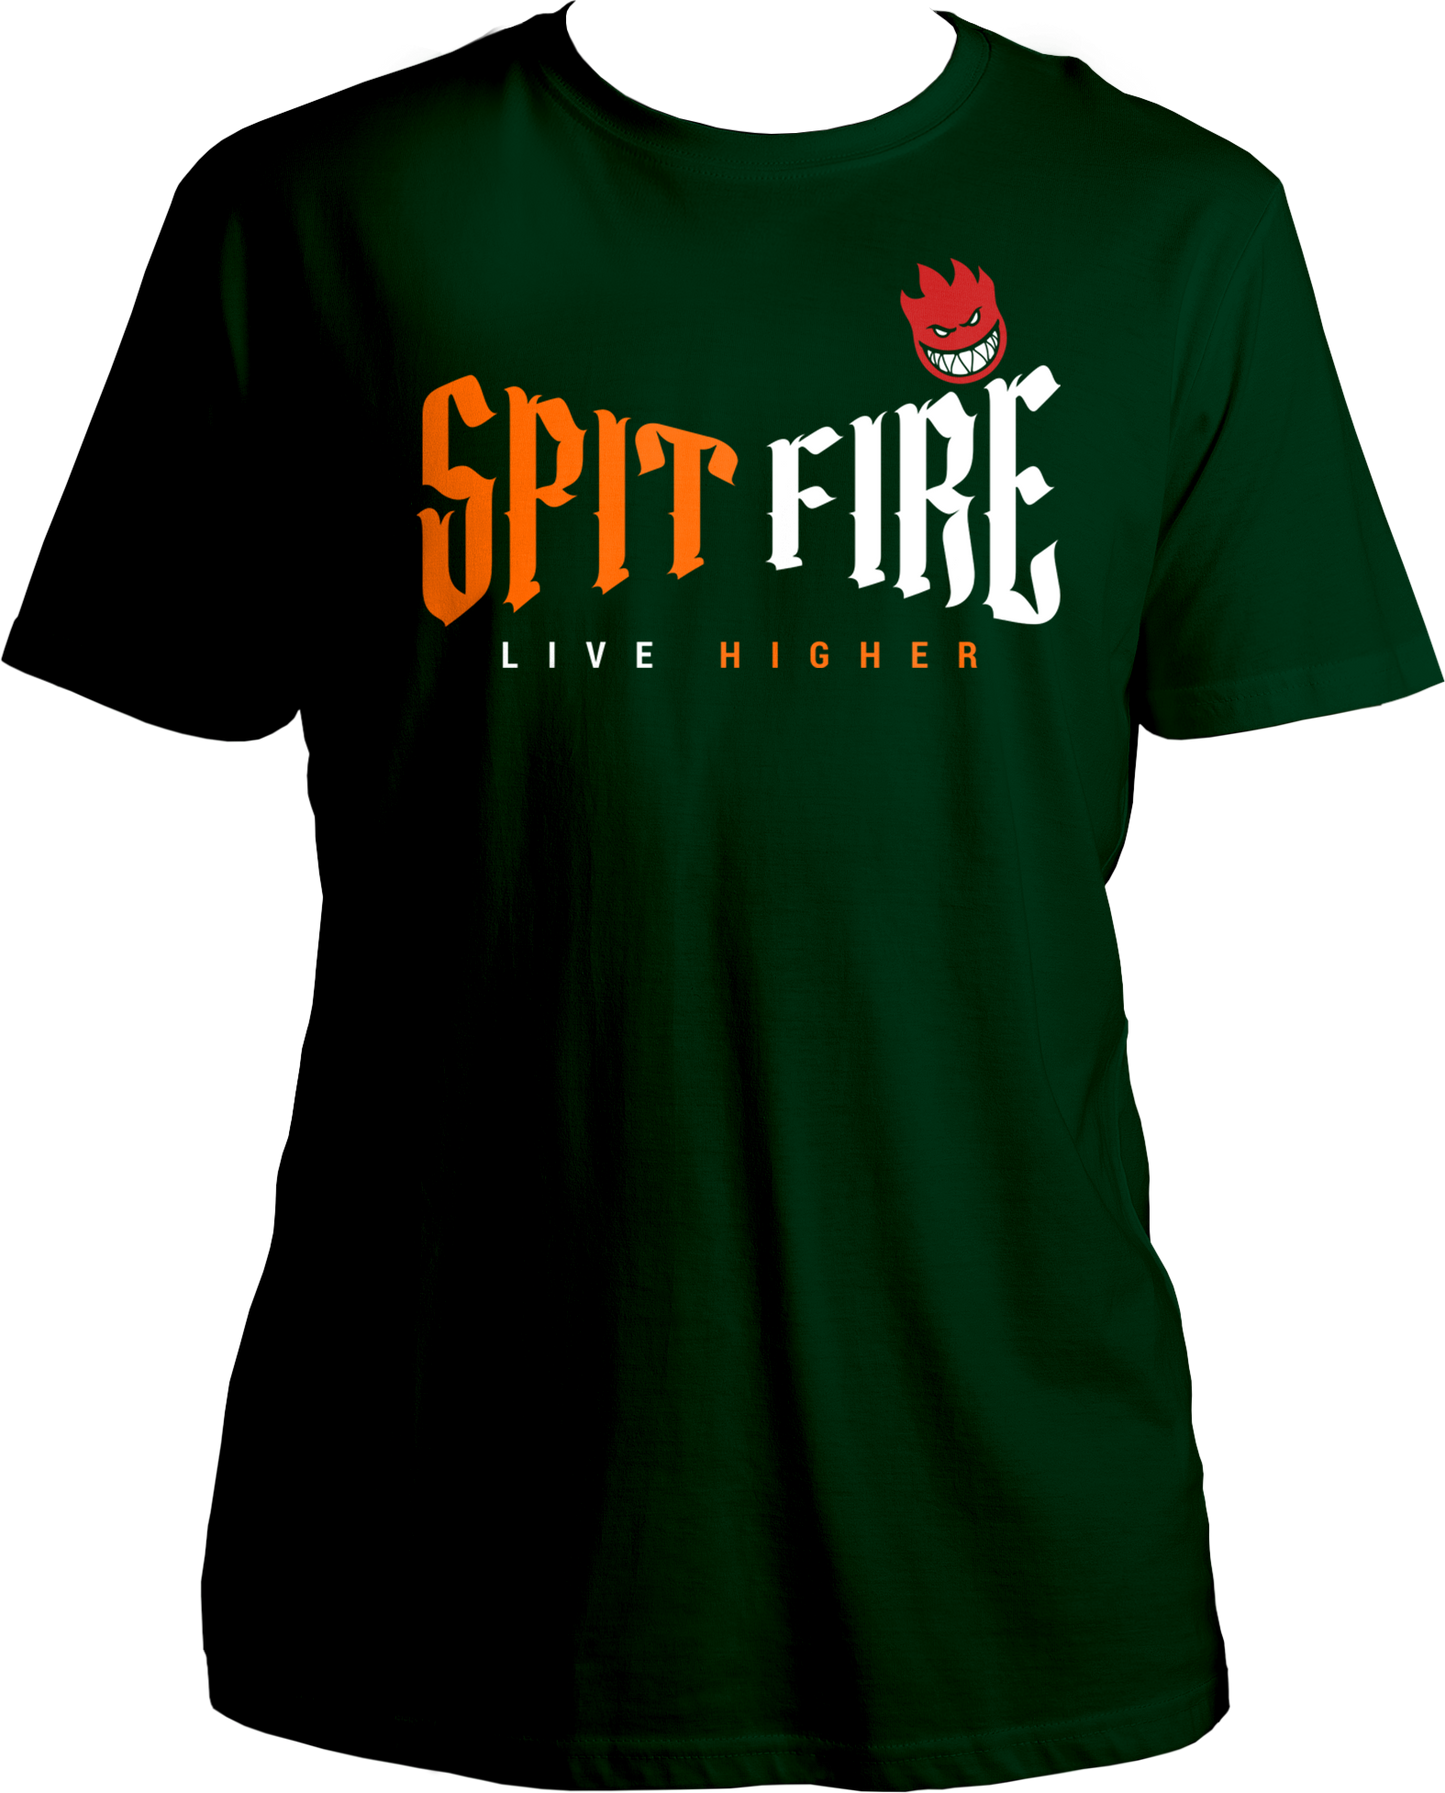 Unleash your inner fire with the KR$NA SPITFIRE LIVE HIGHER Unisex Cotton T-Shirt, a tribute to the indomitable spirit of one of hip-hop’s finest. Featuring the electrifying lines “SPITFIRE LIVE HIGHER,” this tee is designed for those who appreciate the raw talent and relentless energy that KR$NA brings to every track.